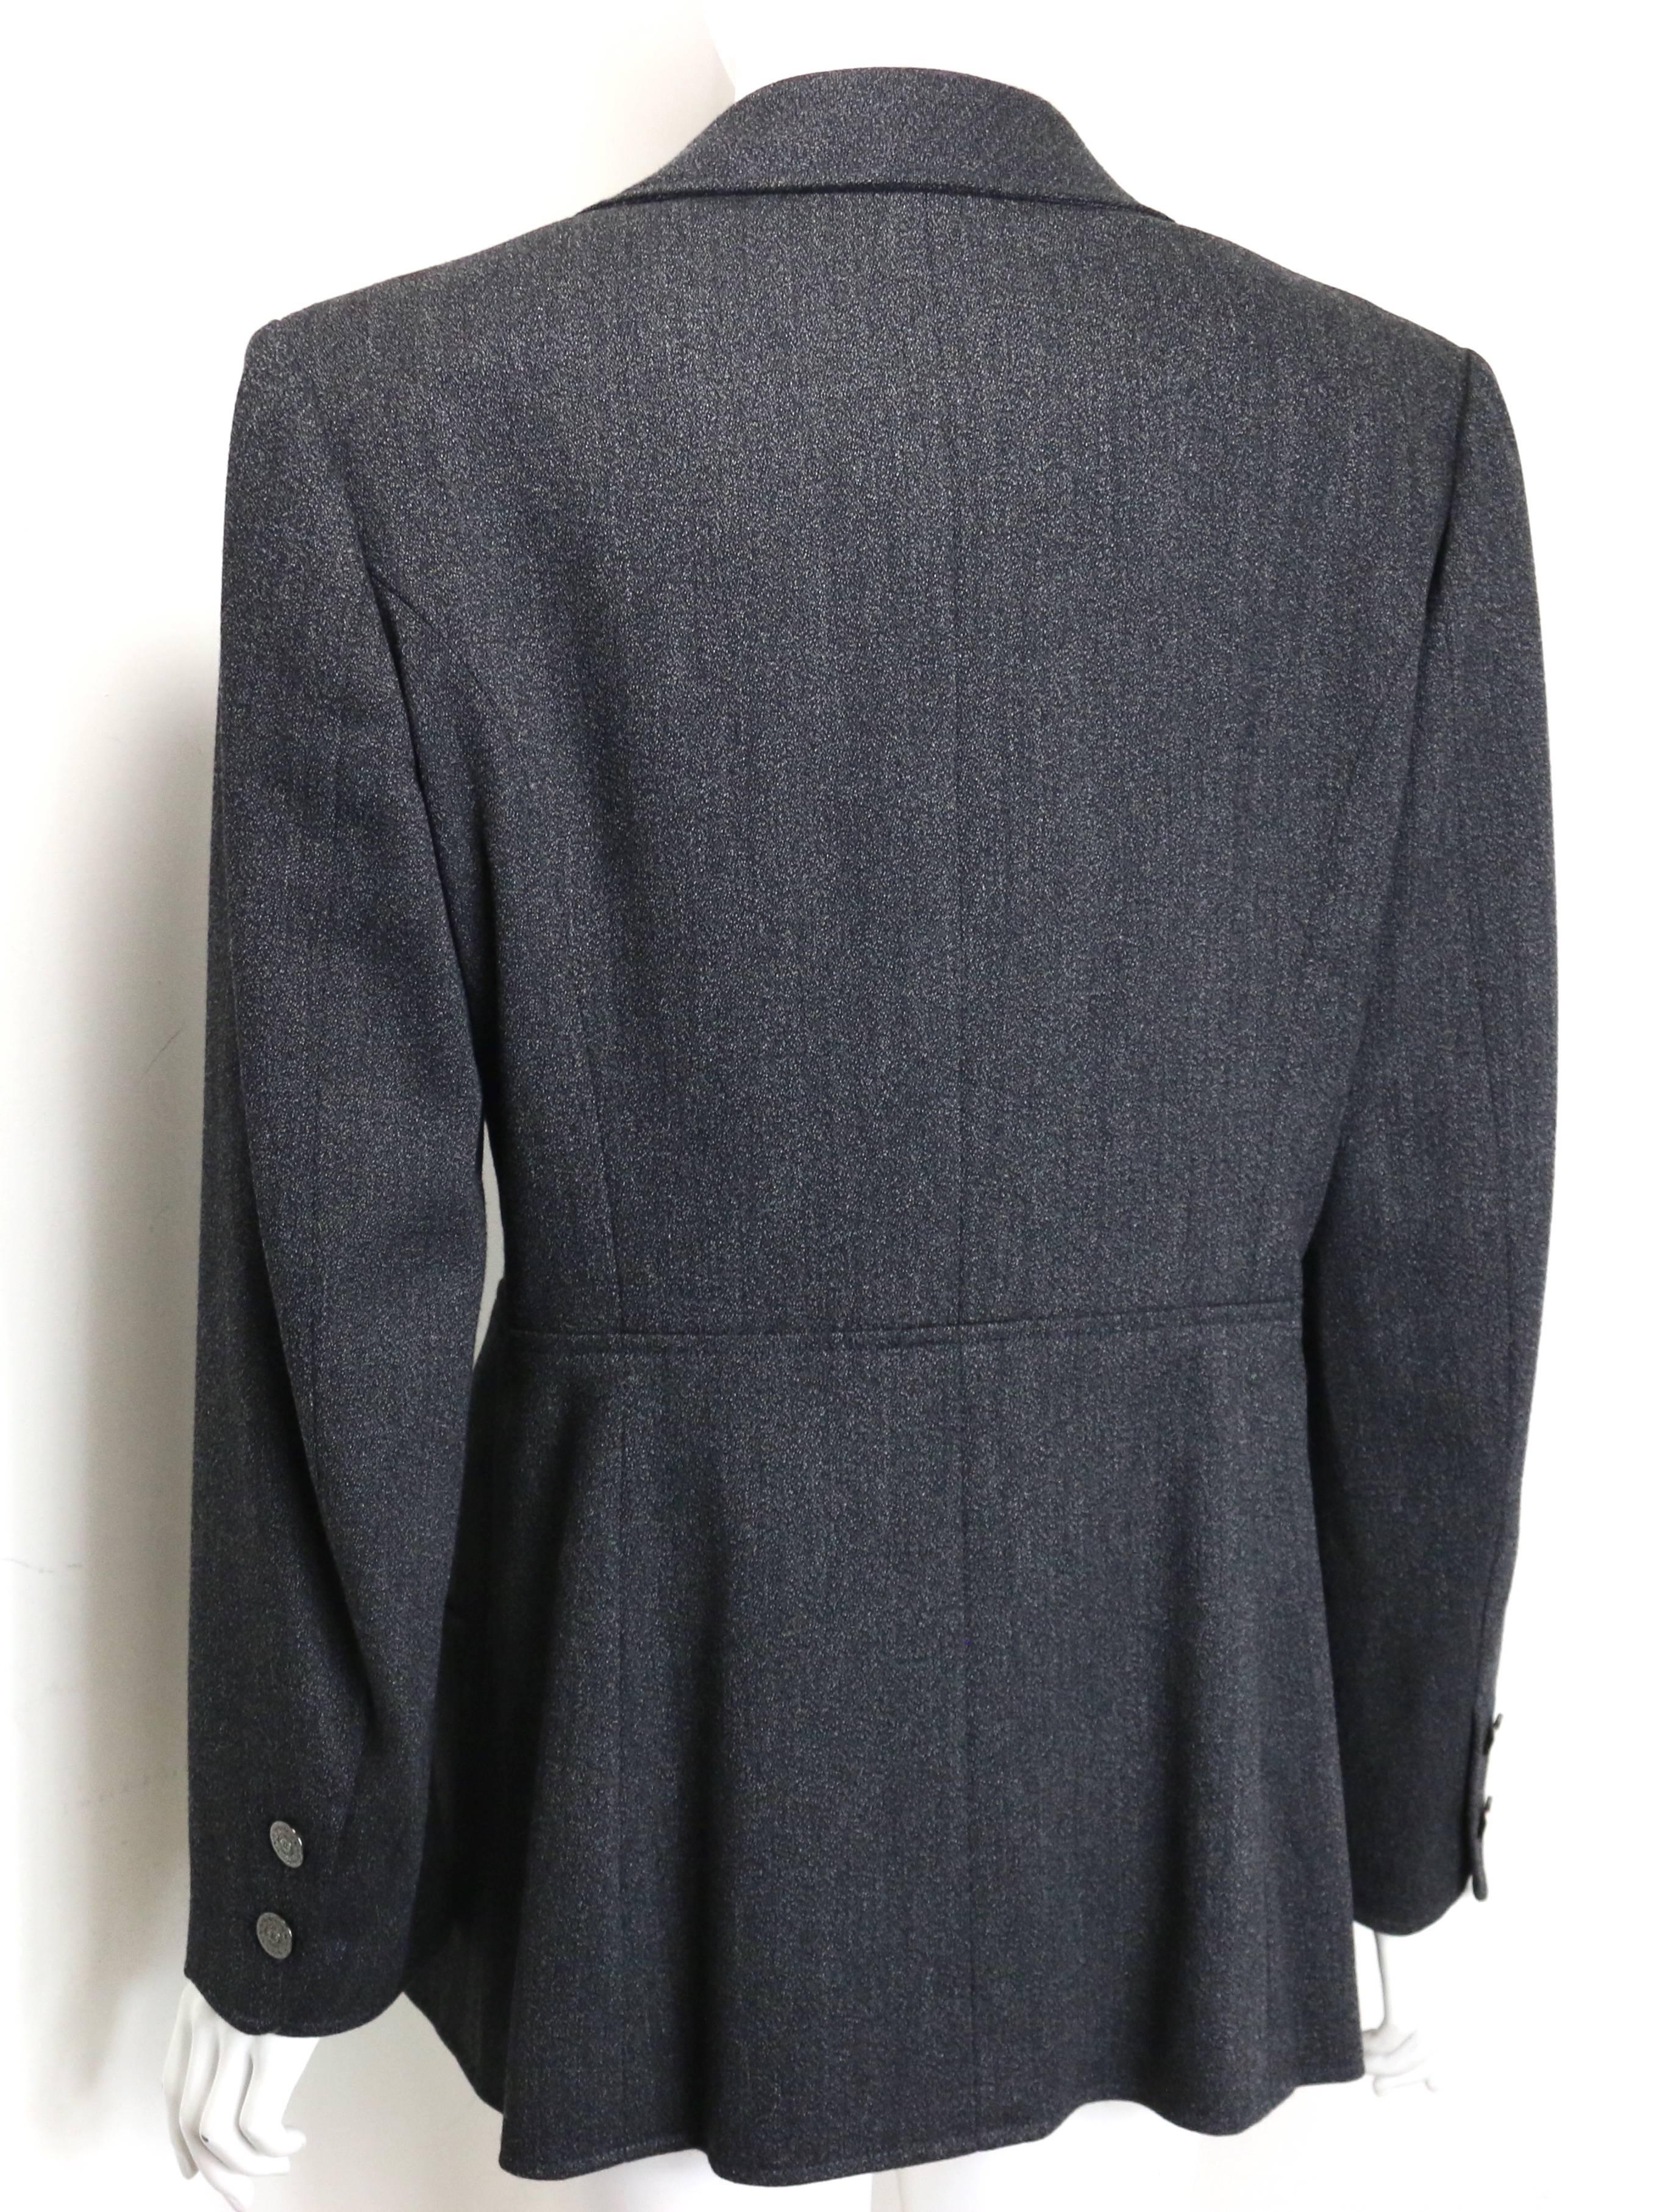 Vintage Fall 1997 Chanel Grey Wool Double Breasted Jacket In Excellent Condition For Sale In Sheung Wan, HK